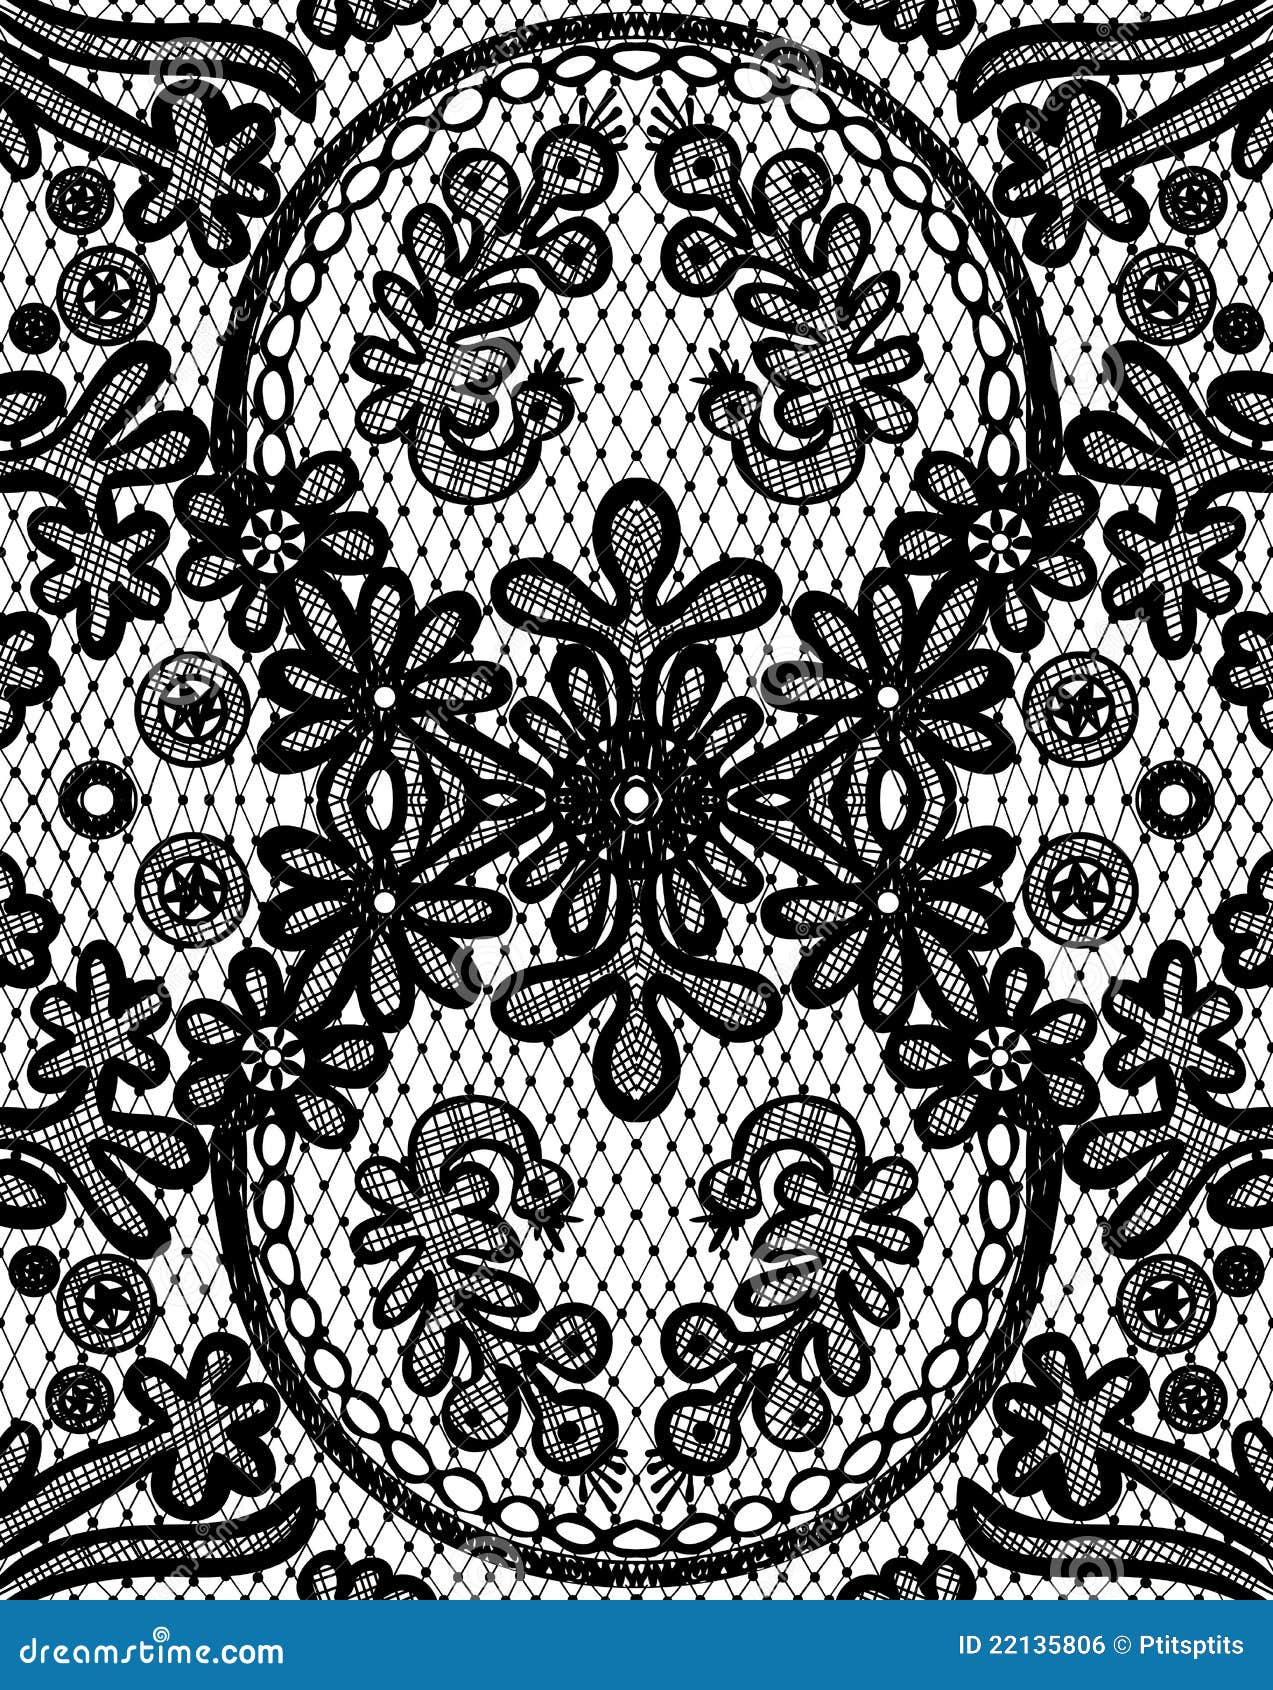 Beautiful Floral Lace with a Circular Elements Stock Vector ...